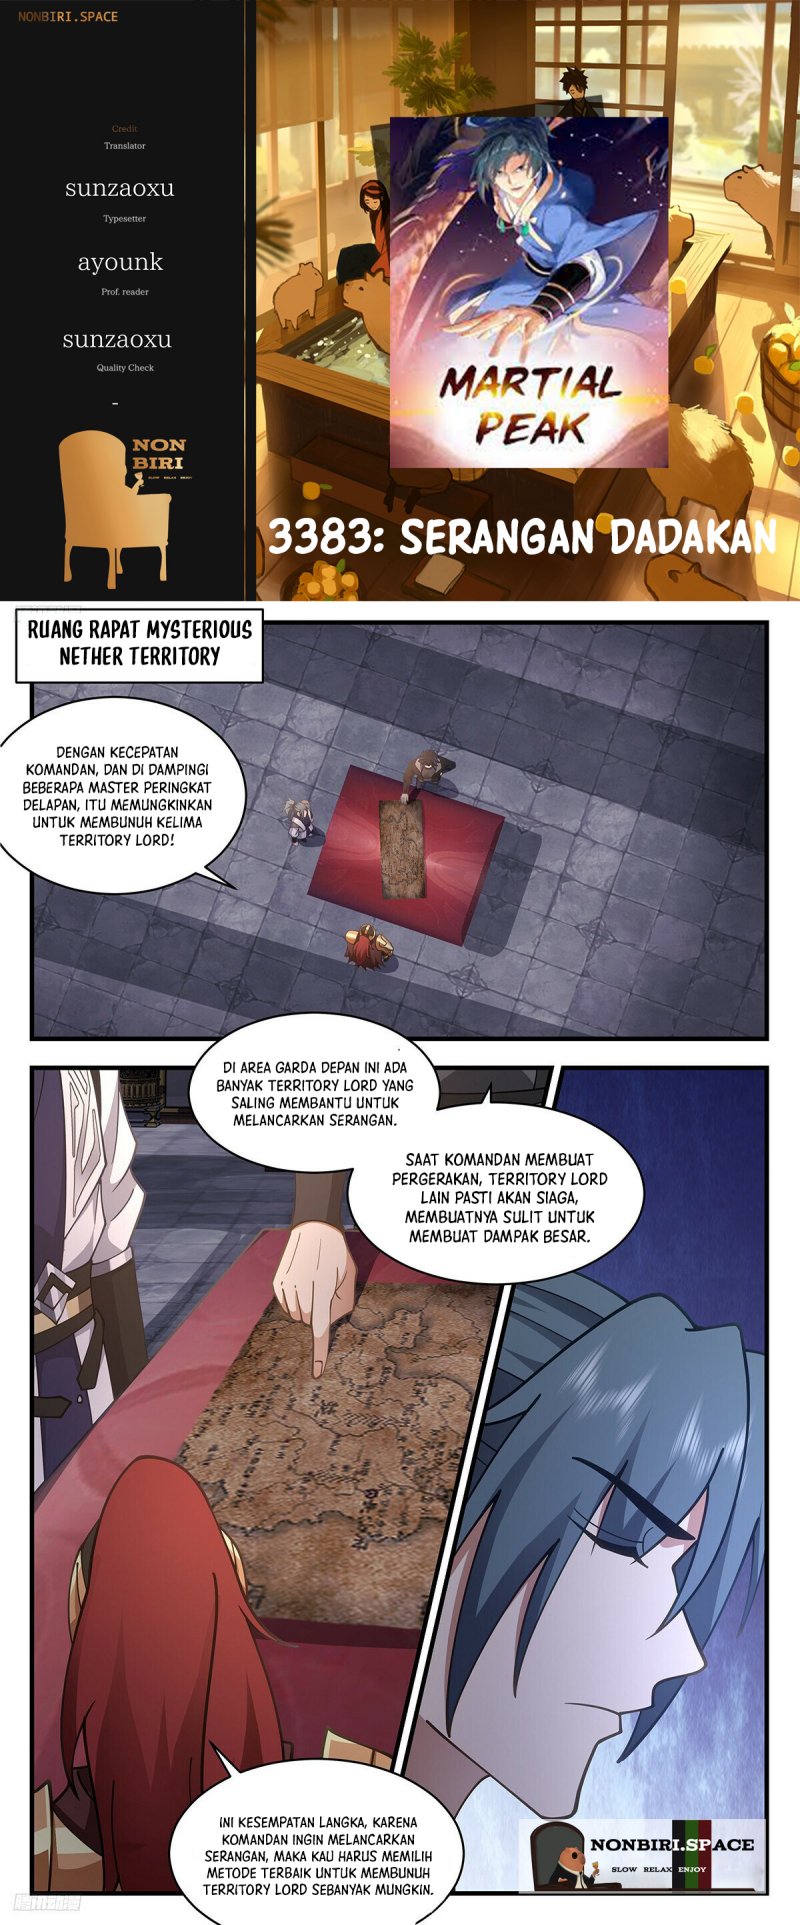 Martial Peak: Chapter 3383 - Page 1